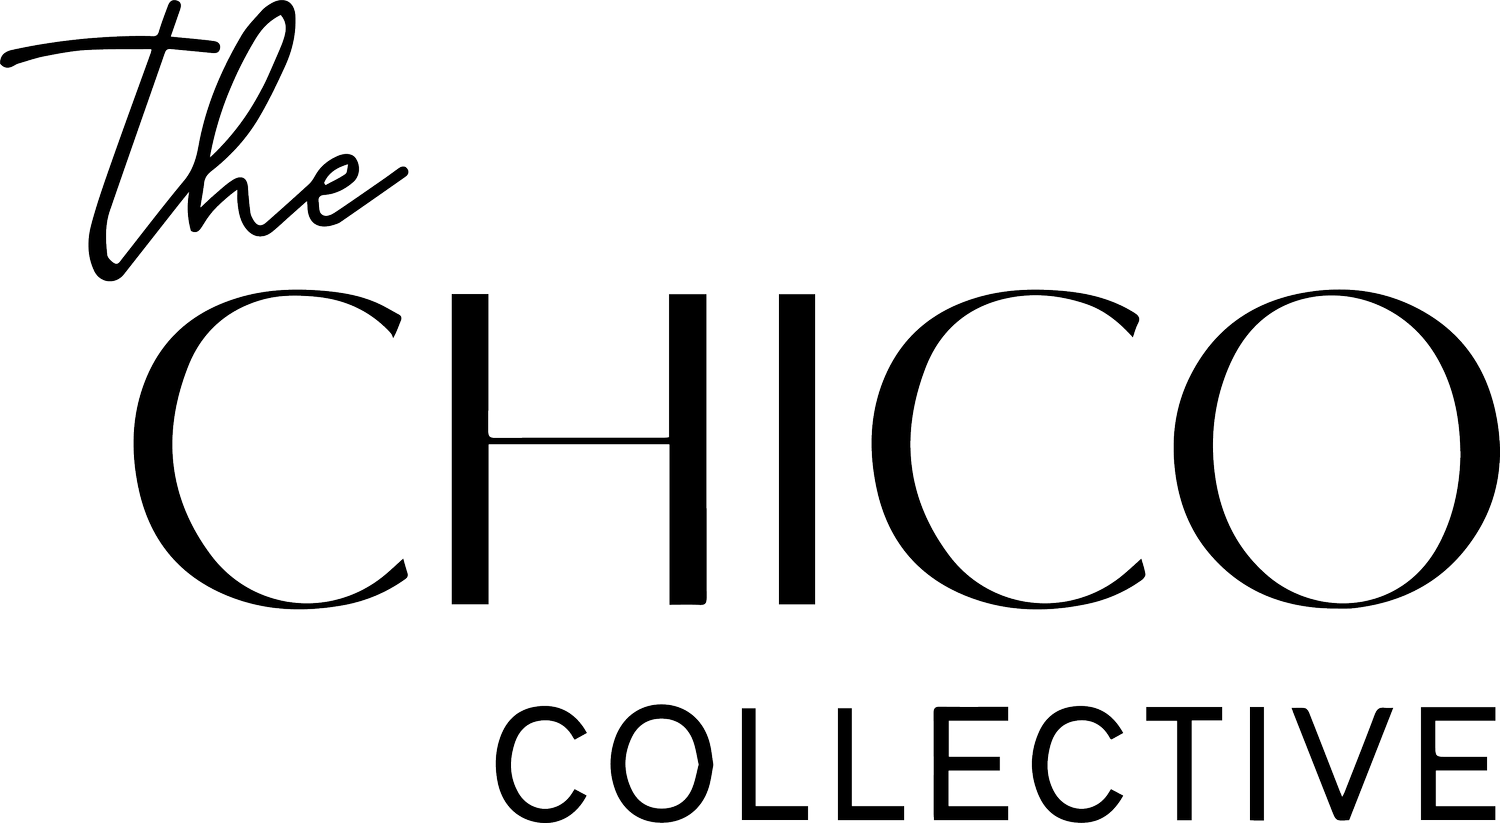 The Chico Collective